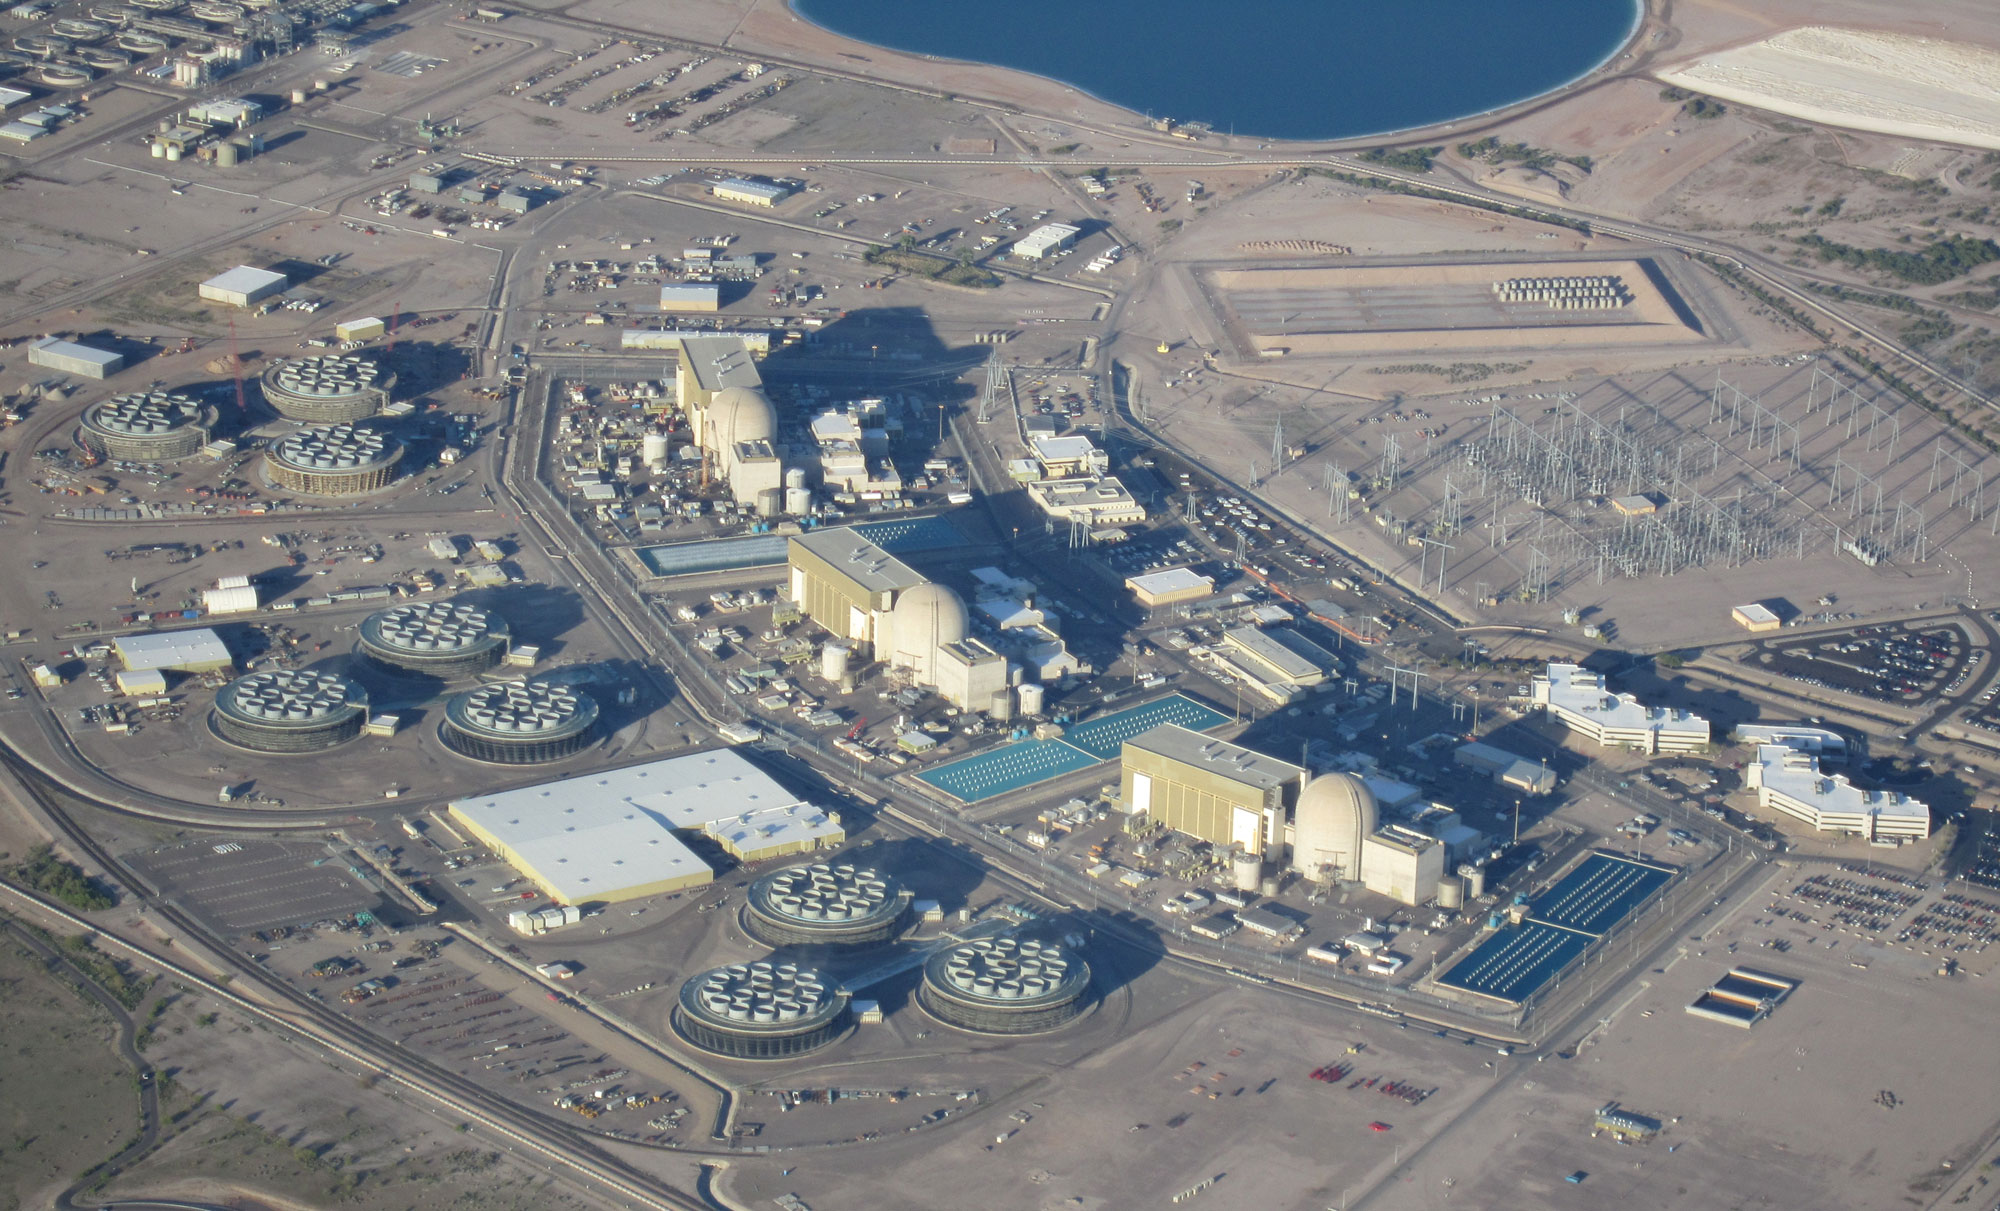 Aerial photo of Palo Verde Nuclear Generating Station in Arizona. The photo shows three reactors and associated building and infrastructure on a barren landscape. The corner of a lake is the top of the image.